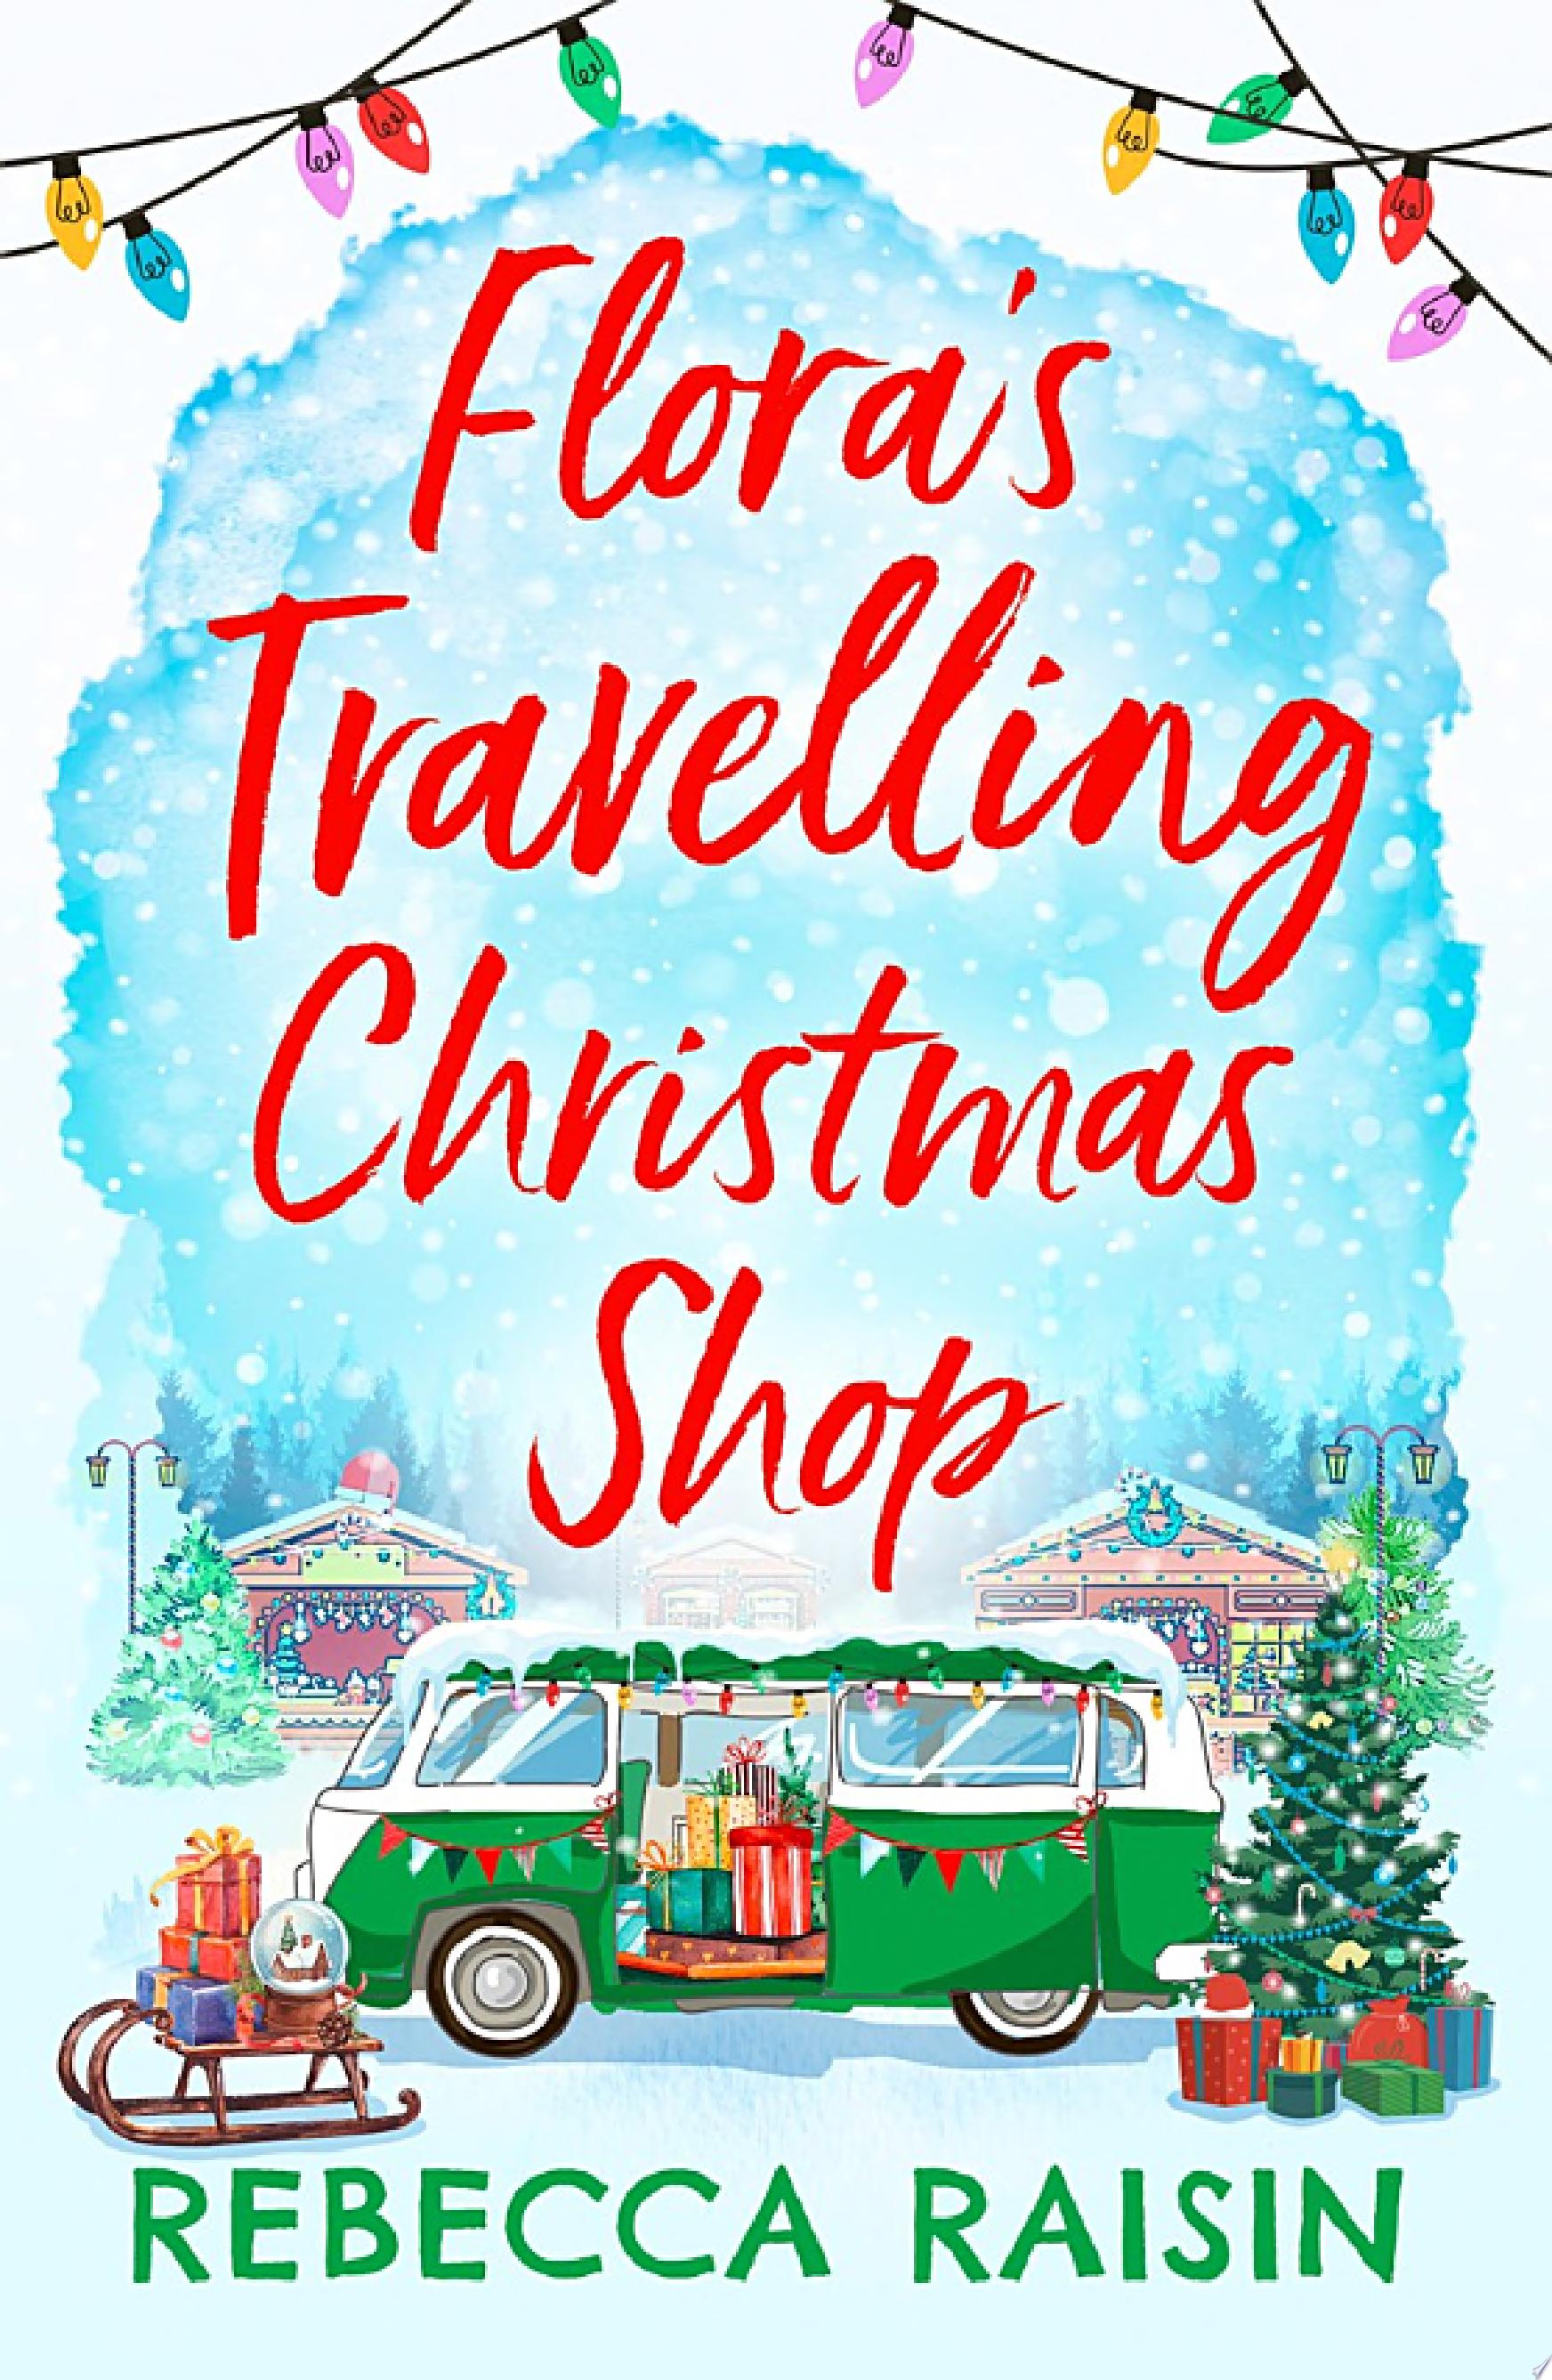 Image for "Flora's Travelling Christmas Shop"